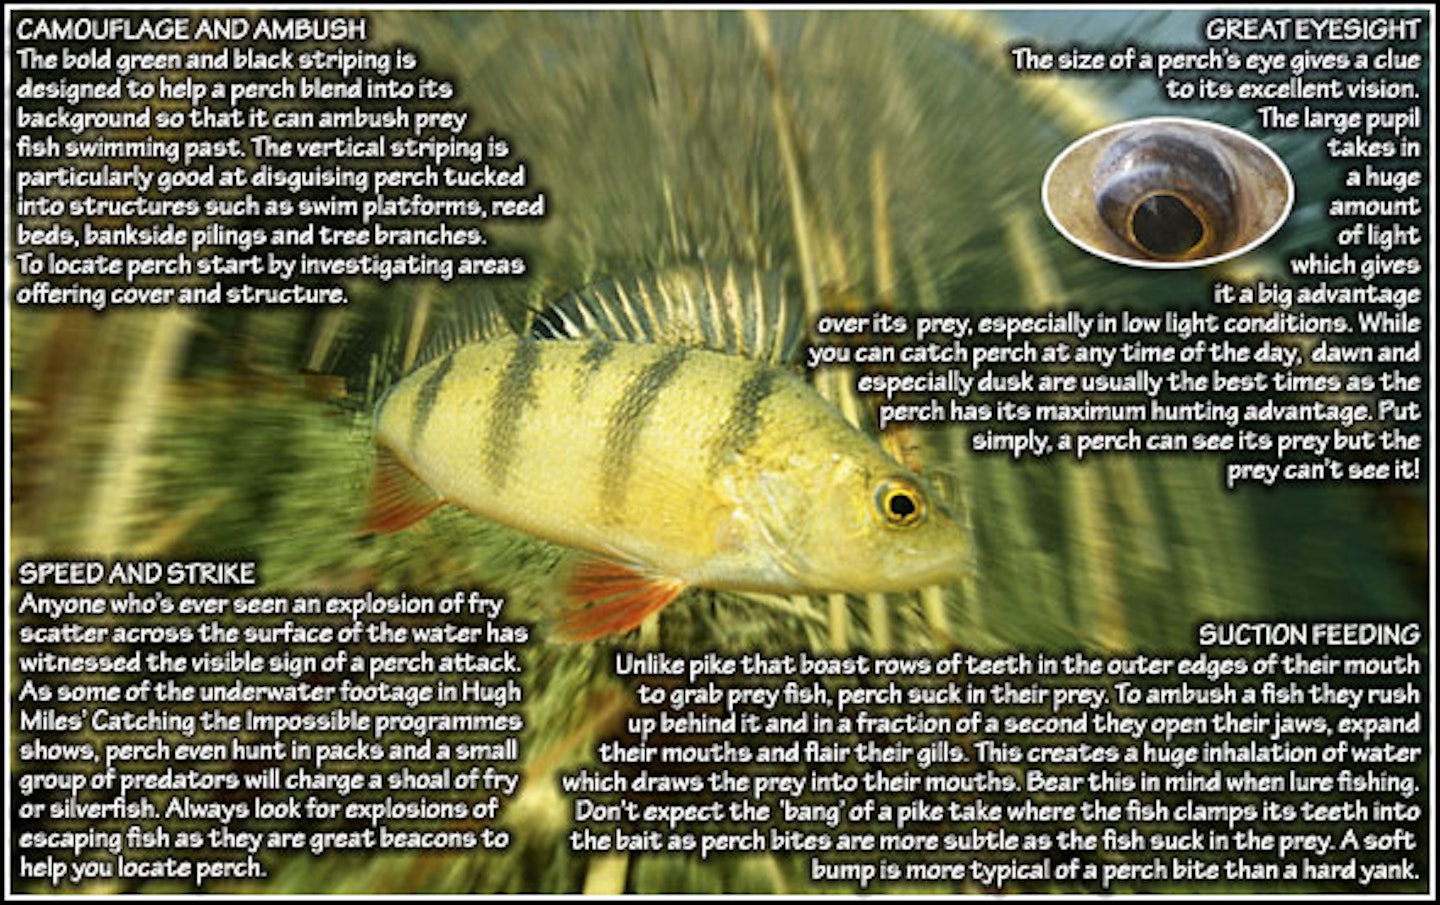 TRY FISHING WITH PLASTIC BAITS TO CATCH BIG PERCH